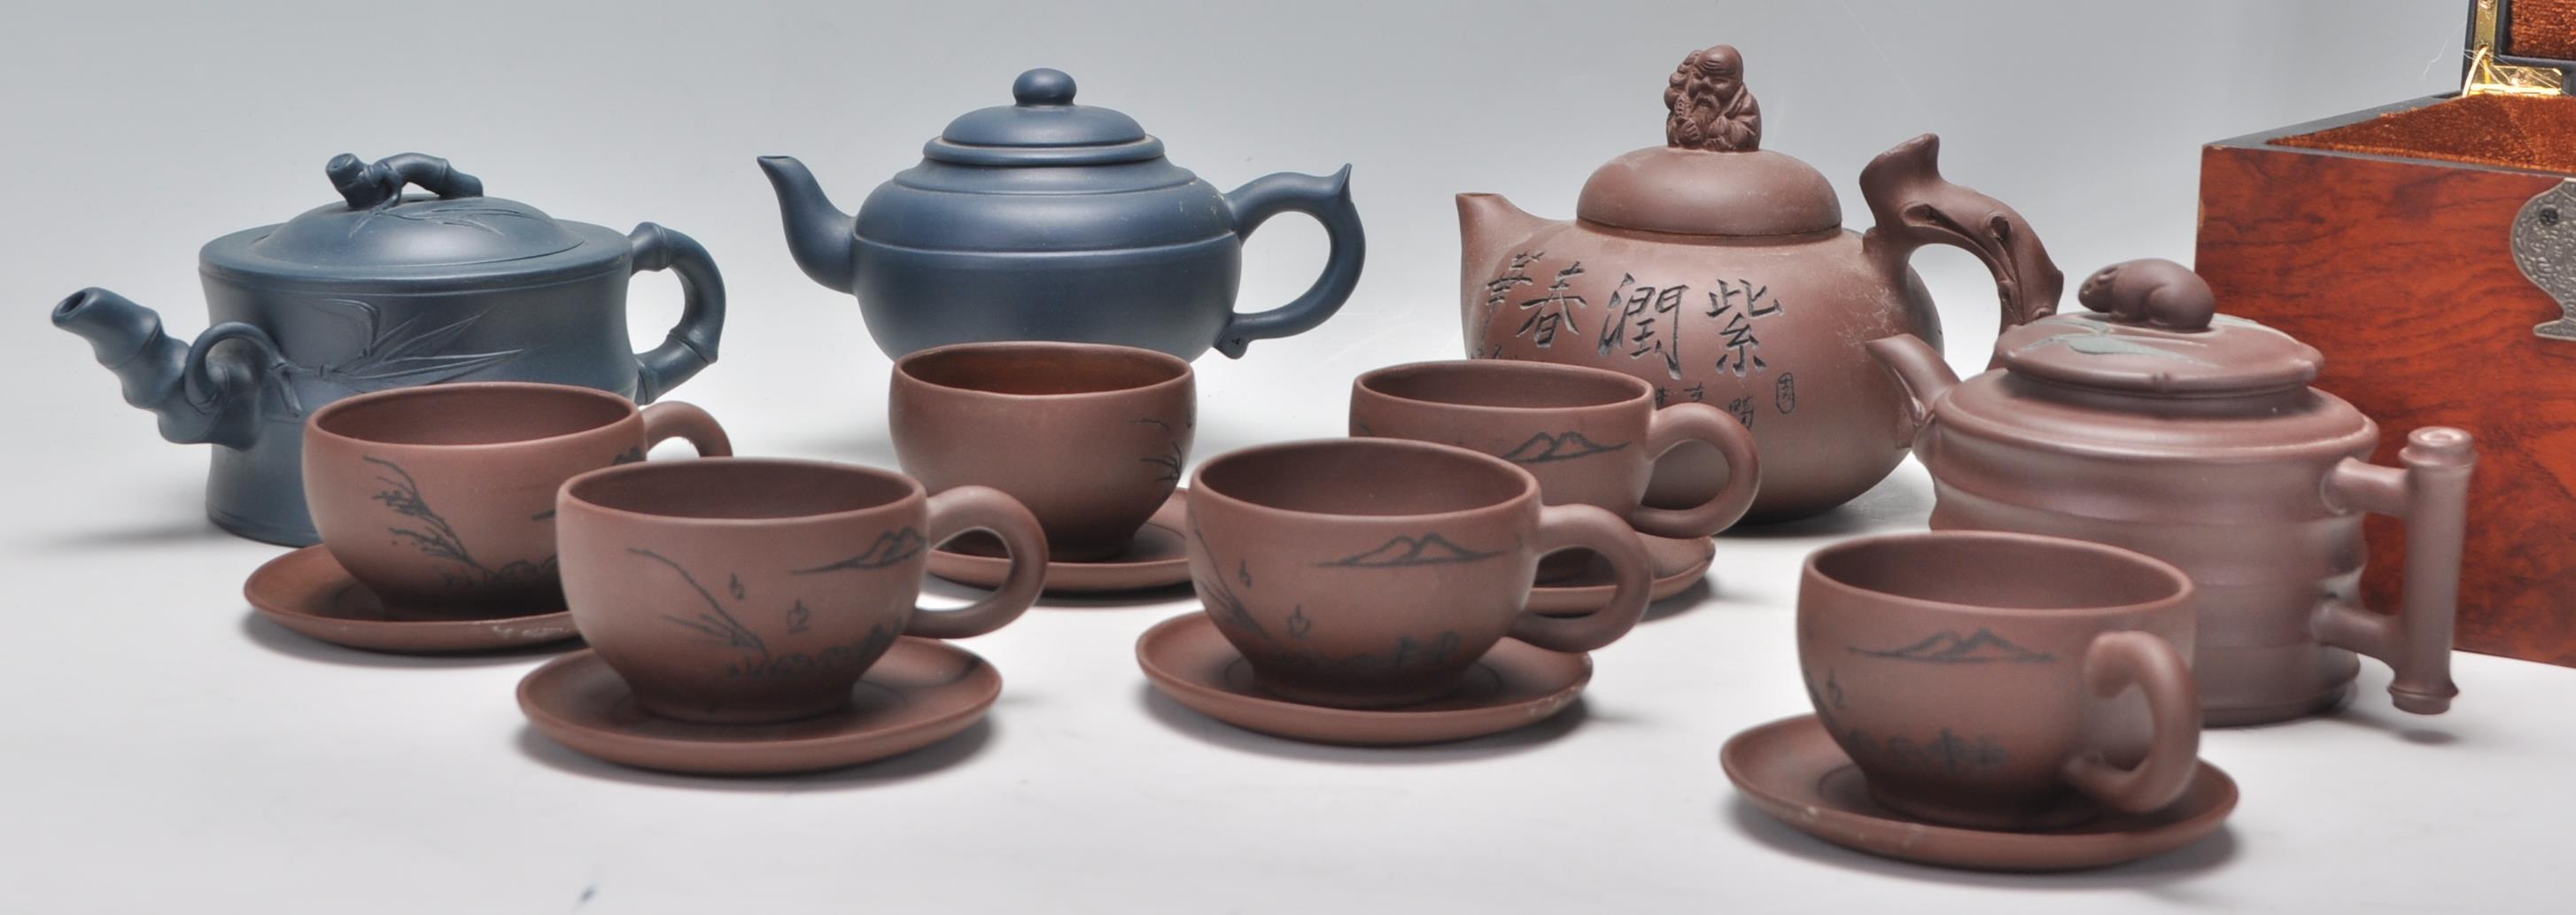 A Chinese Yixing clay teapot having carved decoration of a seated male figure with character marks - Image 11 of 13